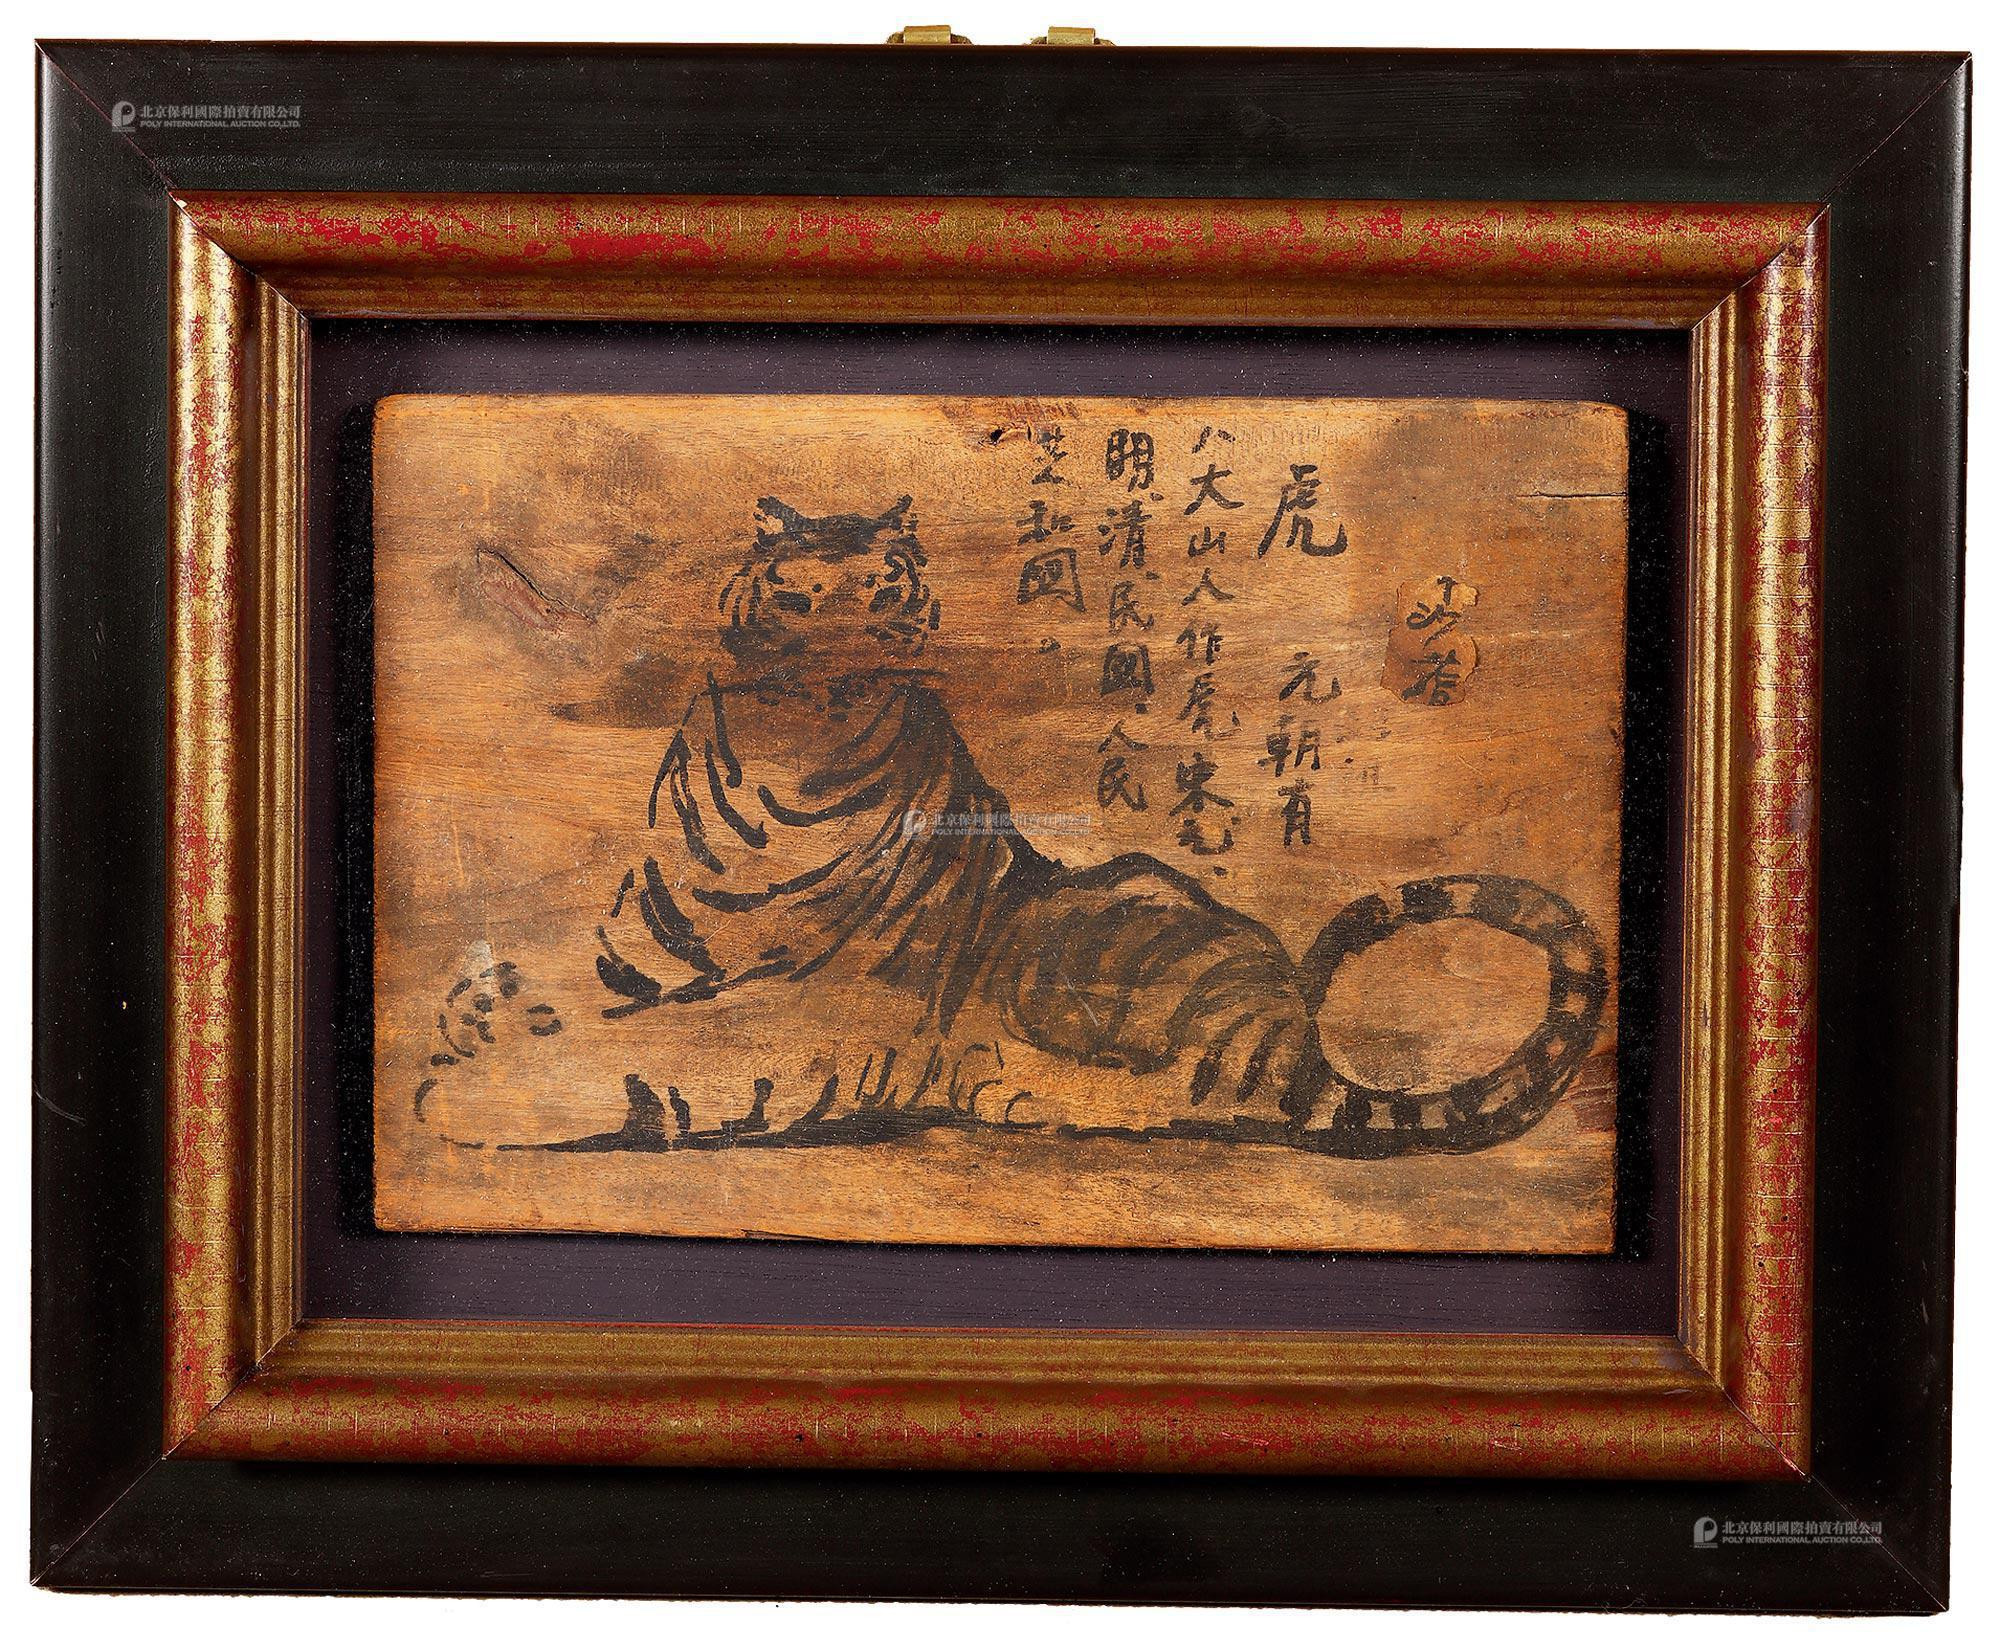 Wooden Plate Painting “Crouching Tiger” by Sha Qi